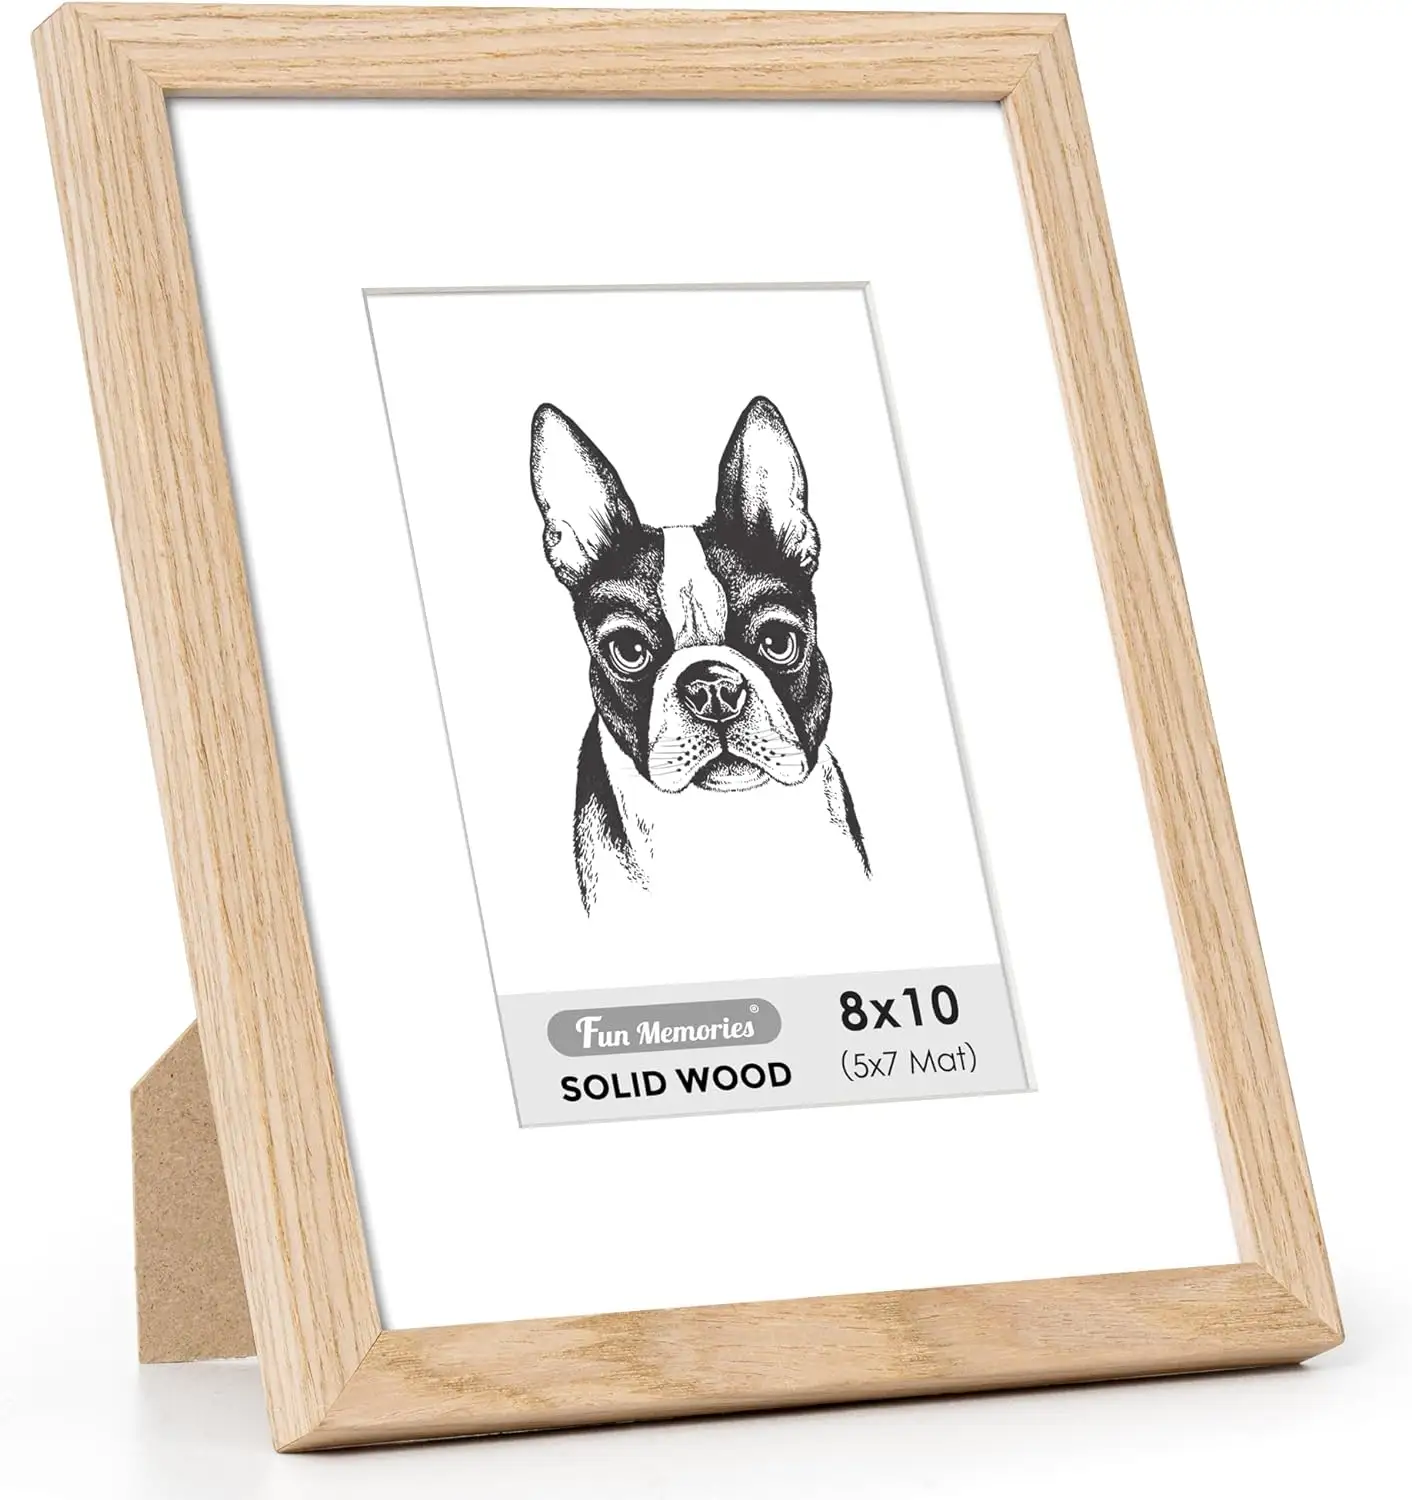 Natural Solid Wooden Picture Frames for Wall Art Photo 8"x10" Oak Wood Picture Frame